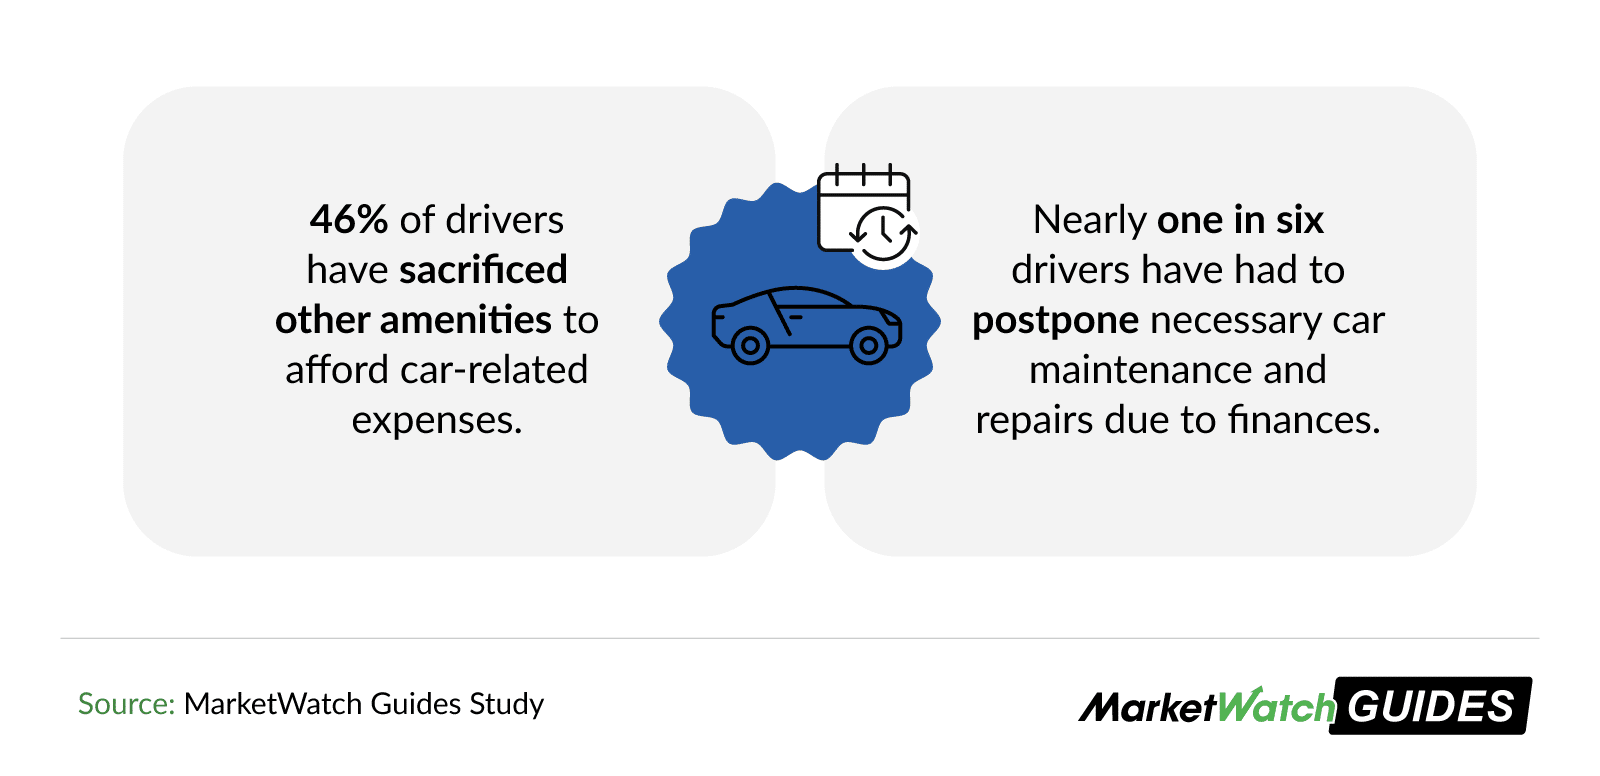 According to our survey, 46% of drivers sacrifice other amenities to afford car-related expenses.